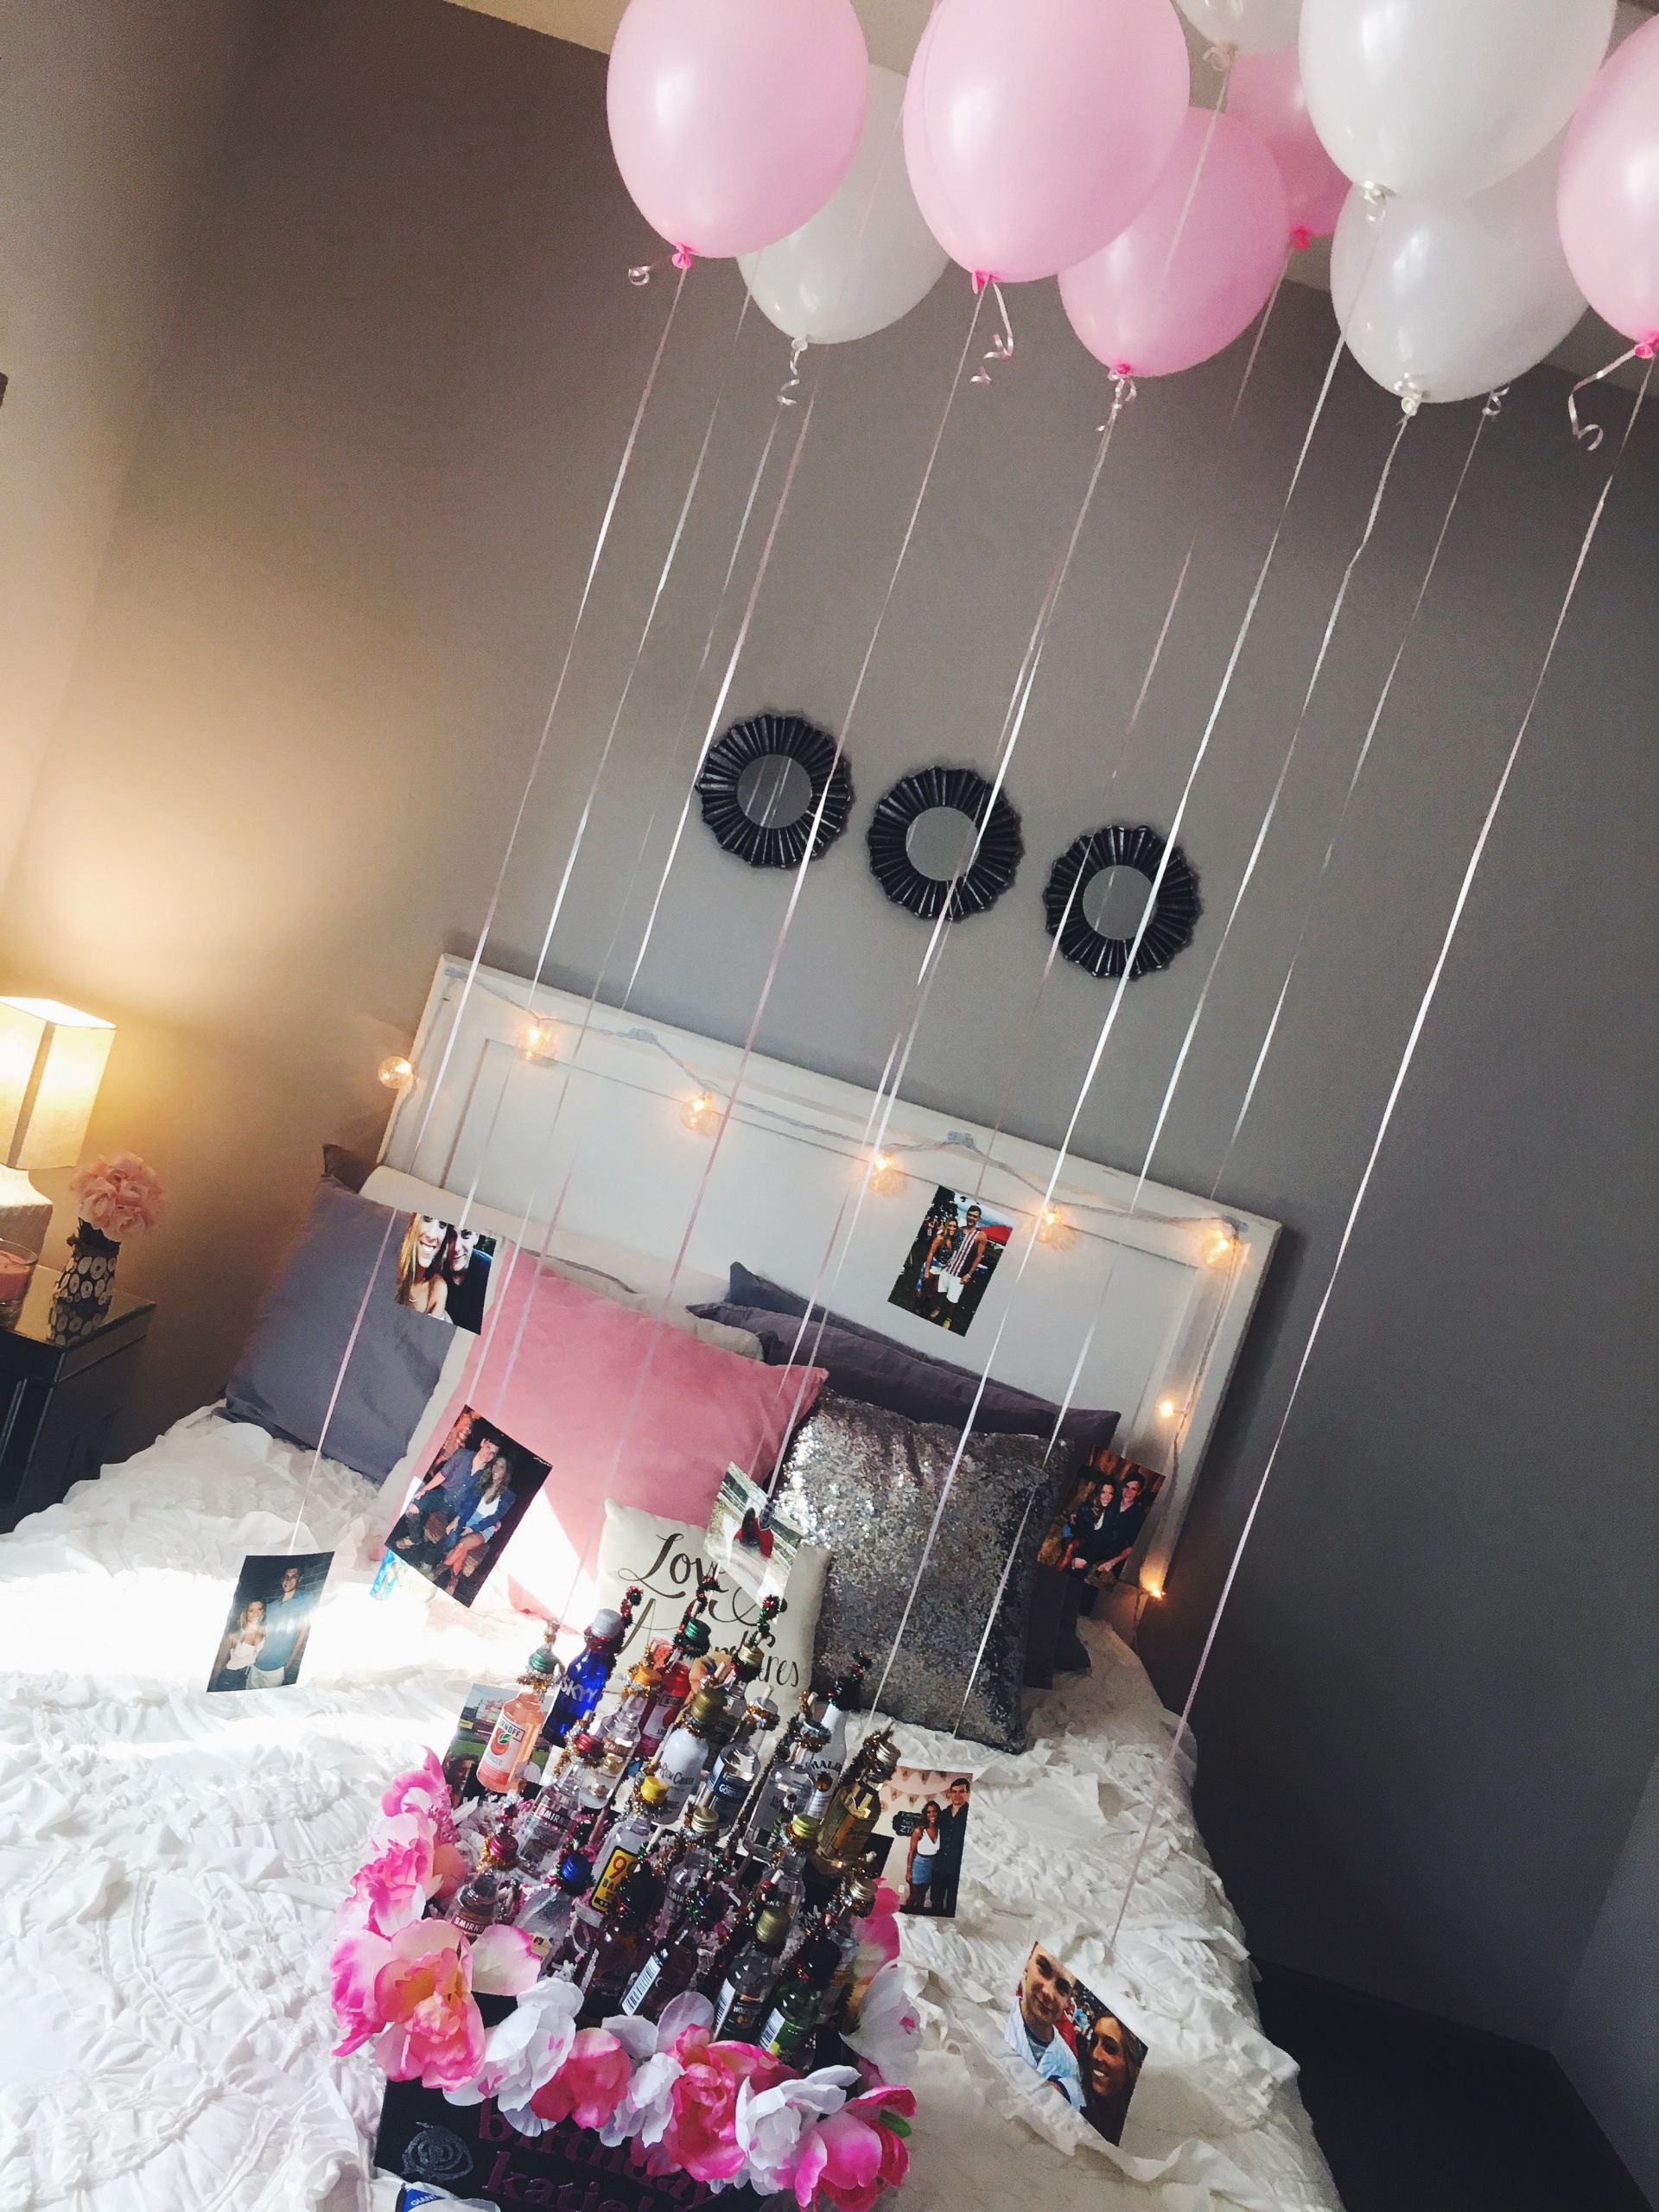 Surprise Gift Ideas For Girlfriend
 easy and cute decorations for a friend or girlfriends 21st